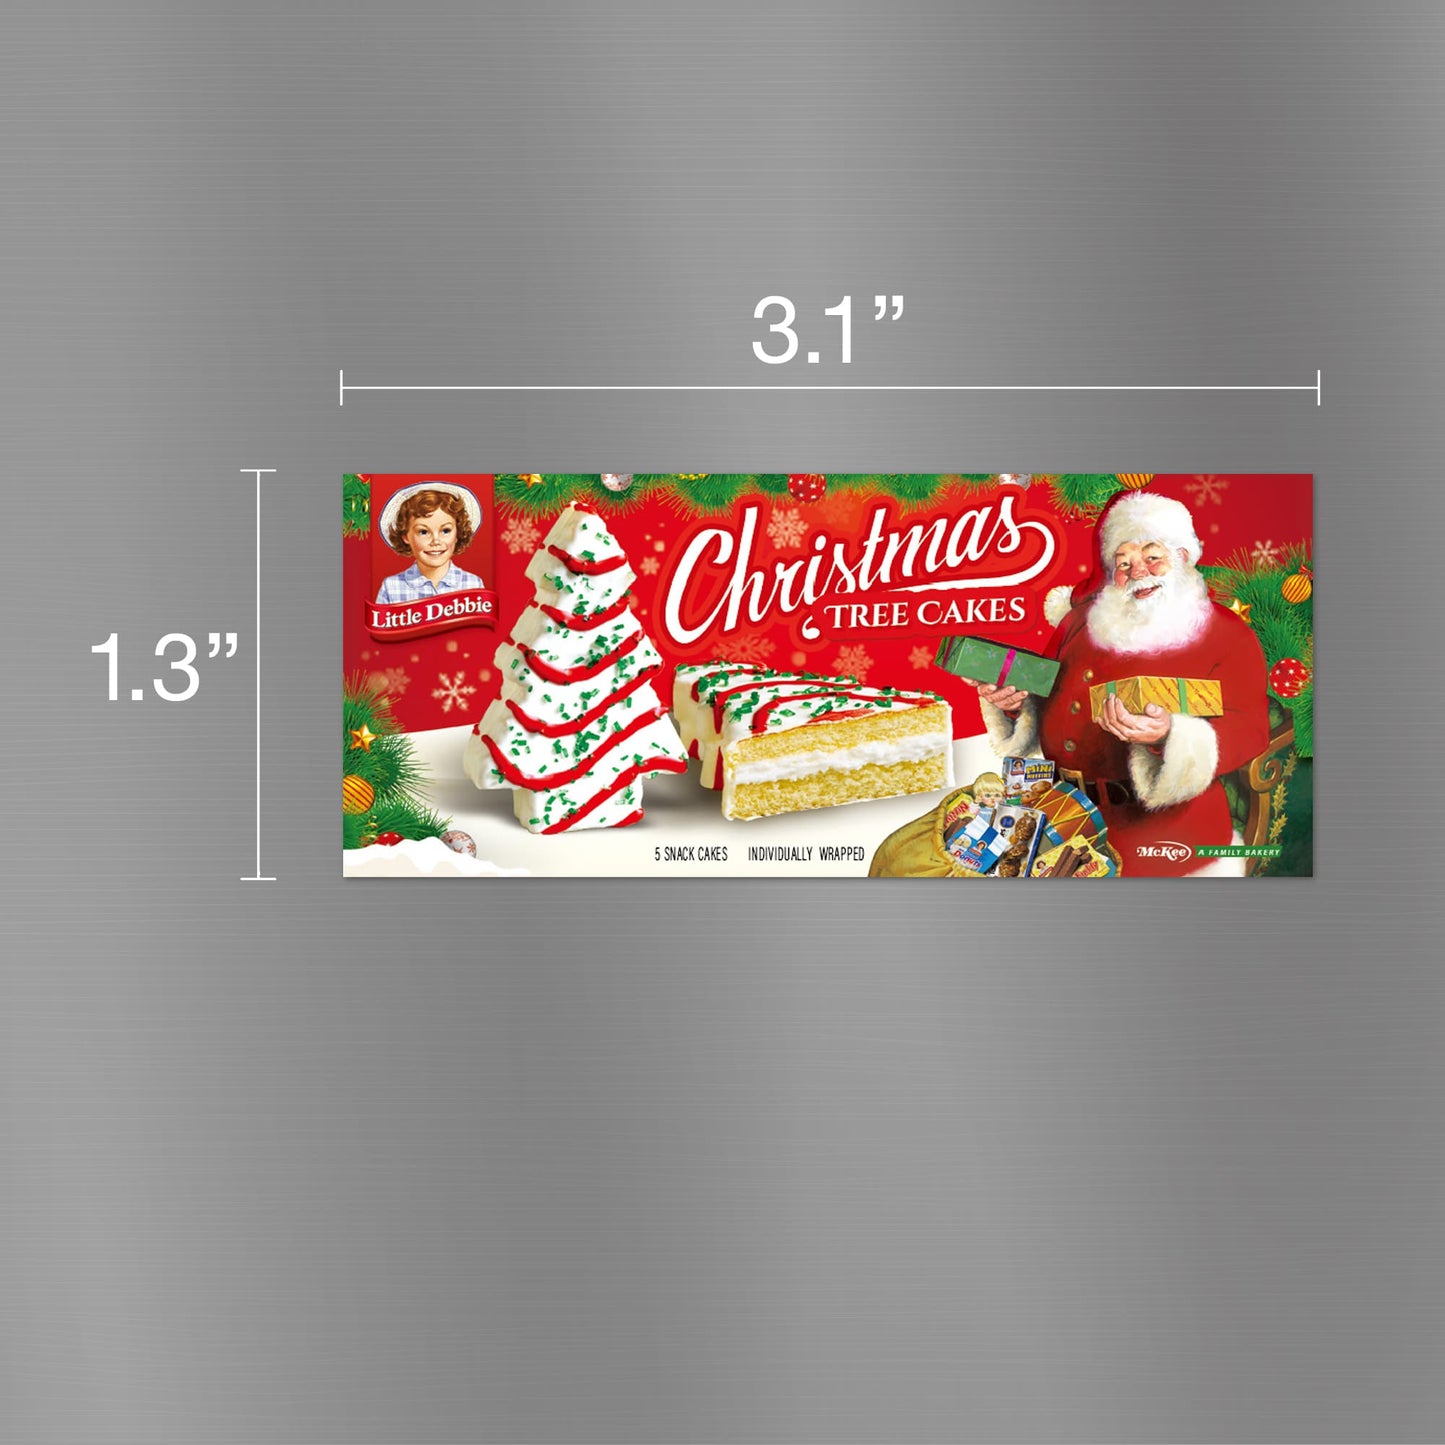 Graphic image of a Little Debbie Christmas Tree Cake carton magnet. The magnet is 3.1 inches wide and 1.3 inches tall, depicting a festive red package adorned with images of the Little Debbie logo, a smiling Santa Claus holding a gift, and a Christmas Tree Cake decorated with green frosting and red sprinkles. Additionally, there are images of the actual snack cakes, sliced to show their creamy filling.